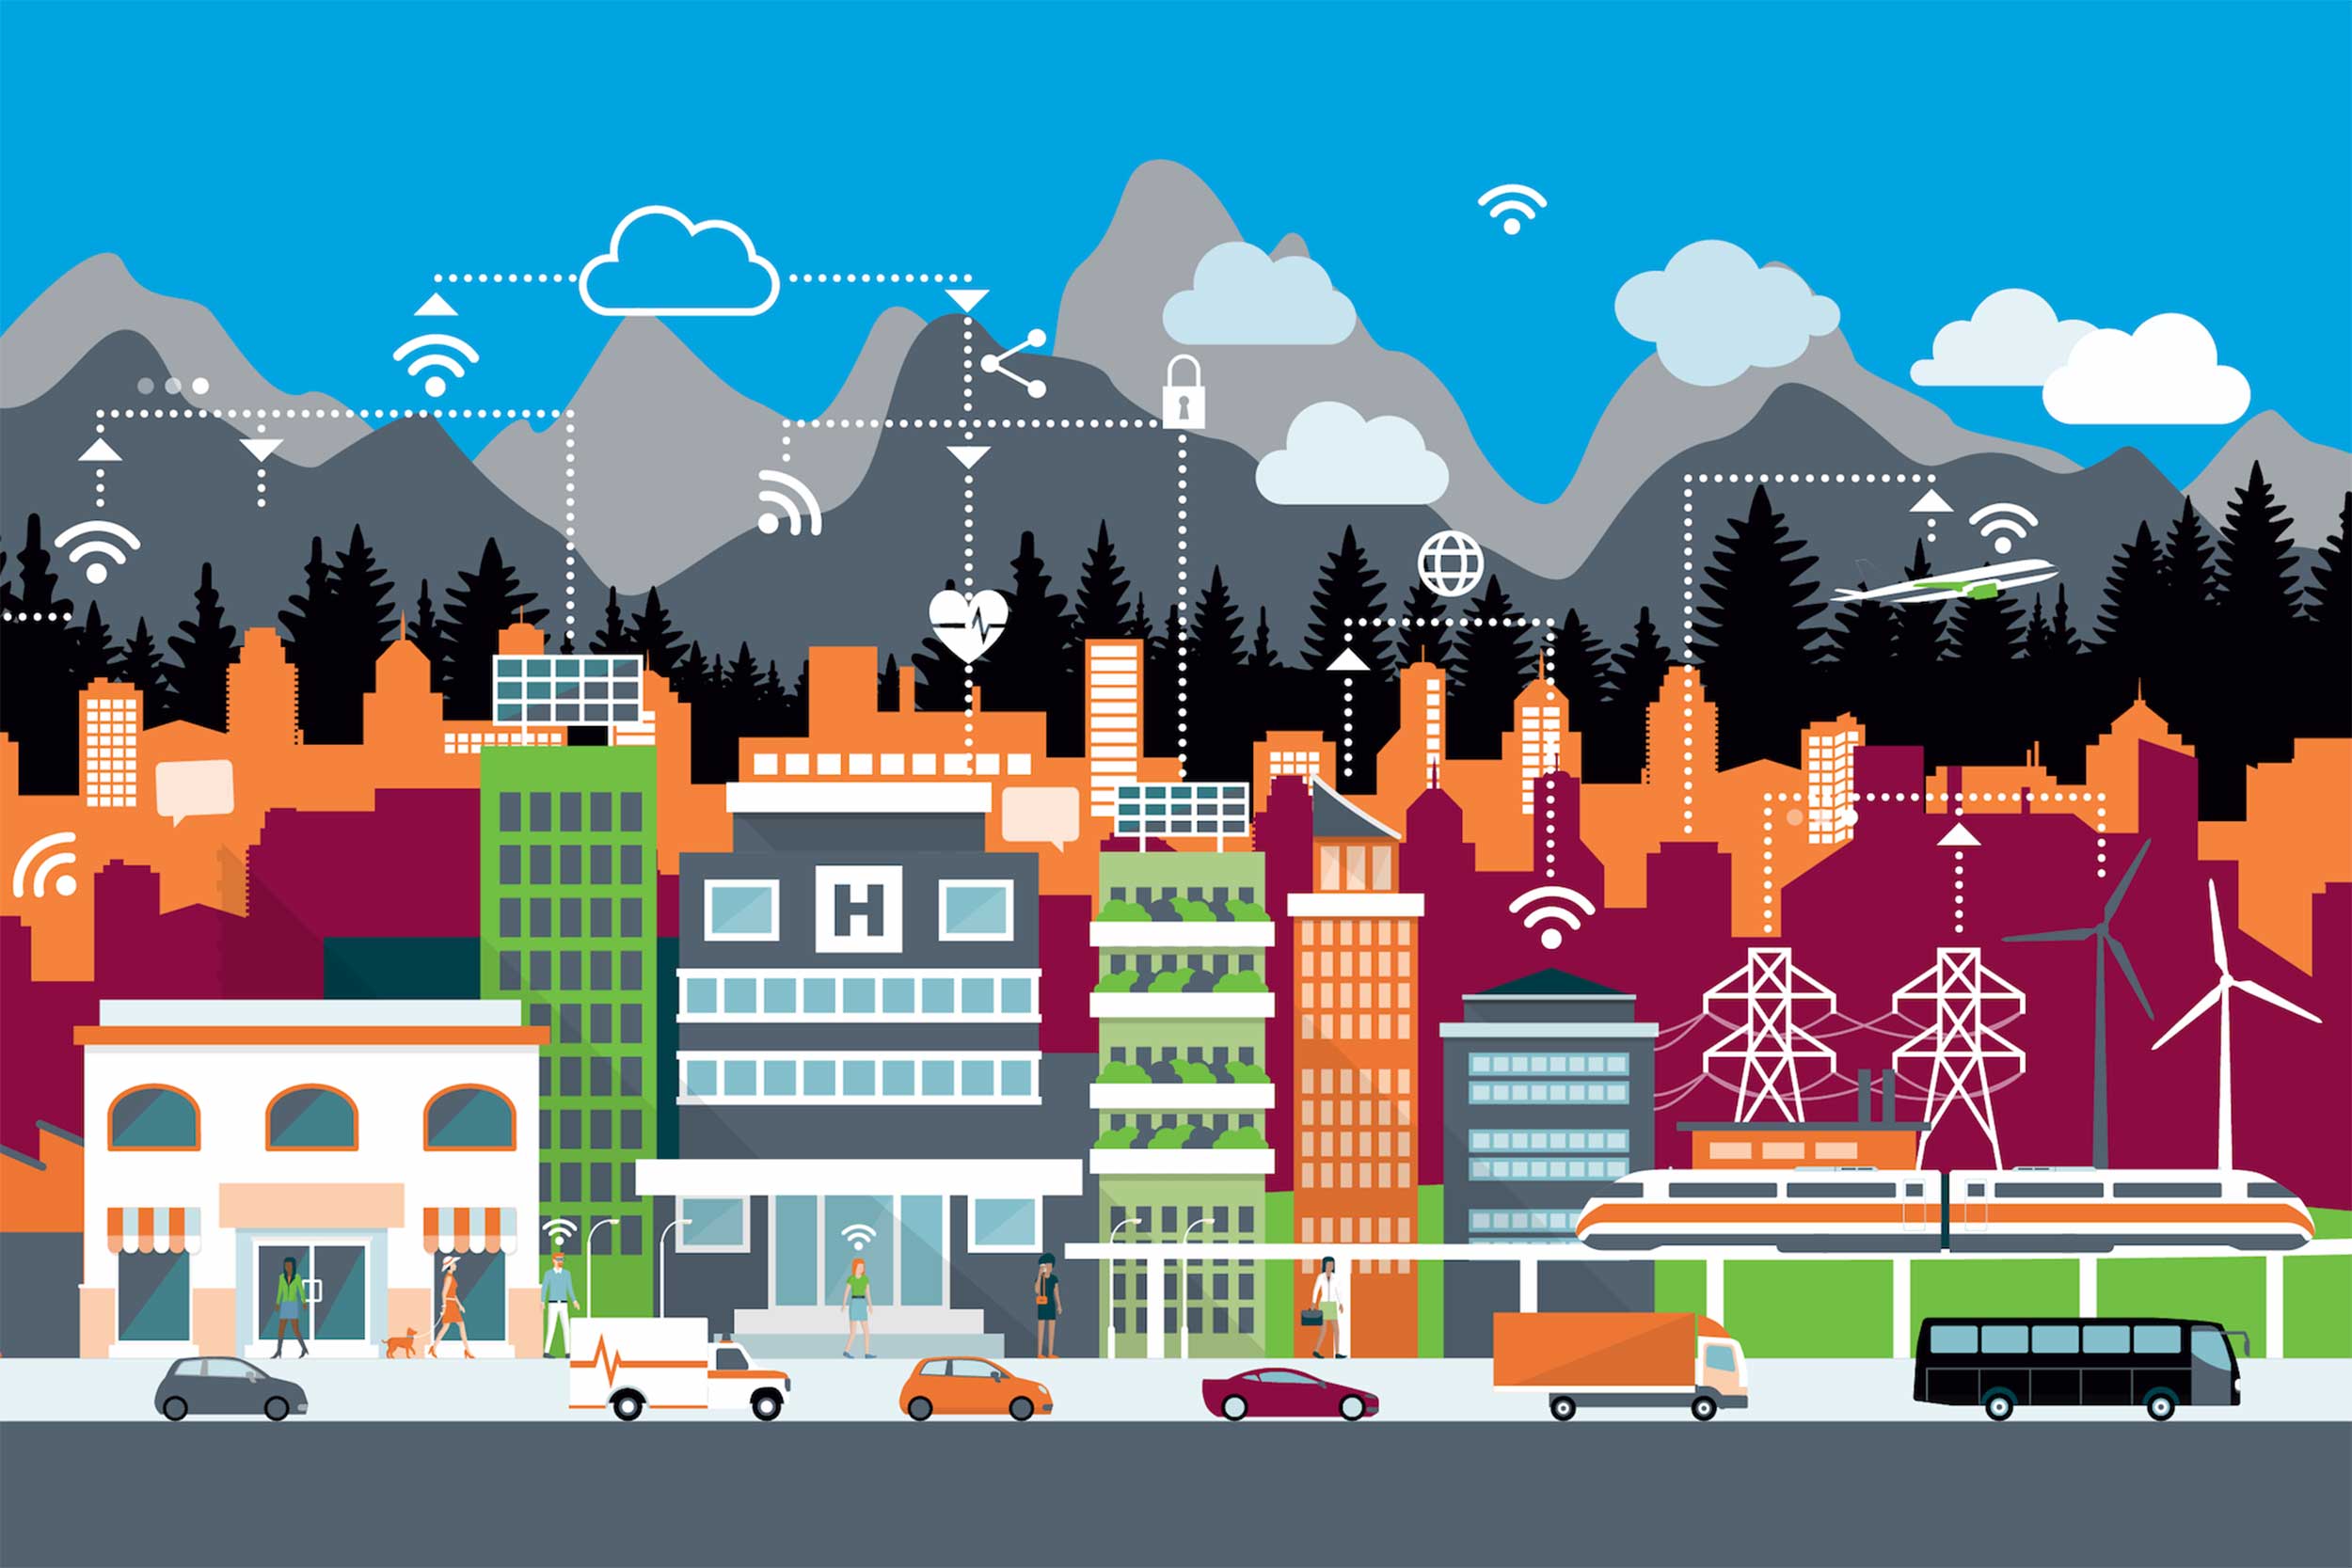 Colorful, stylized graphic of a smart city in the foothills of a mountain range with symbols of connectivity between businesses, people and vehicles